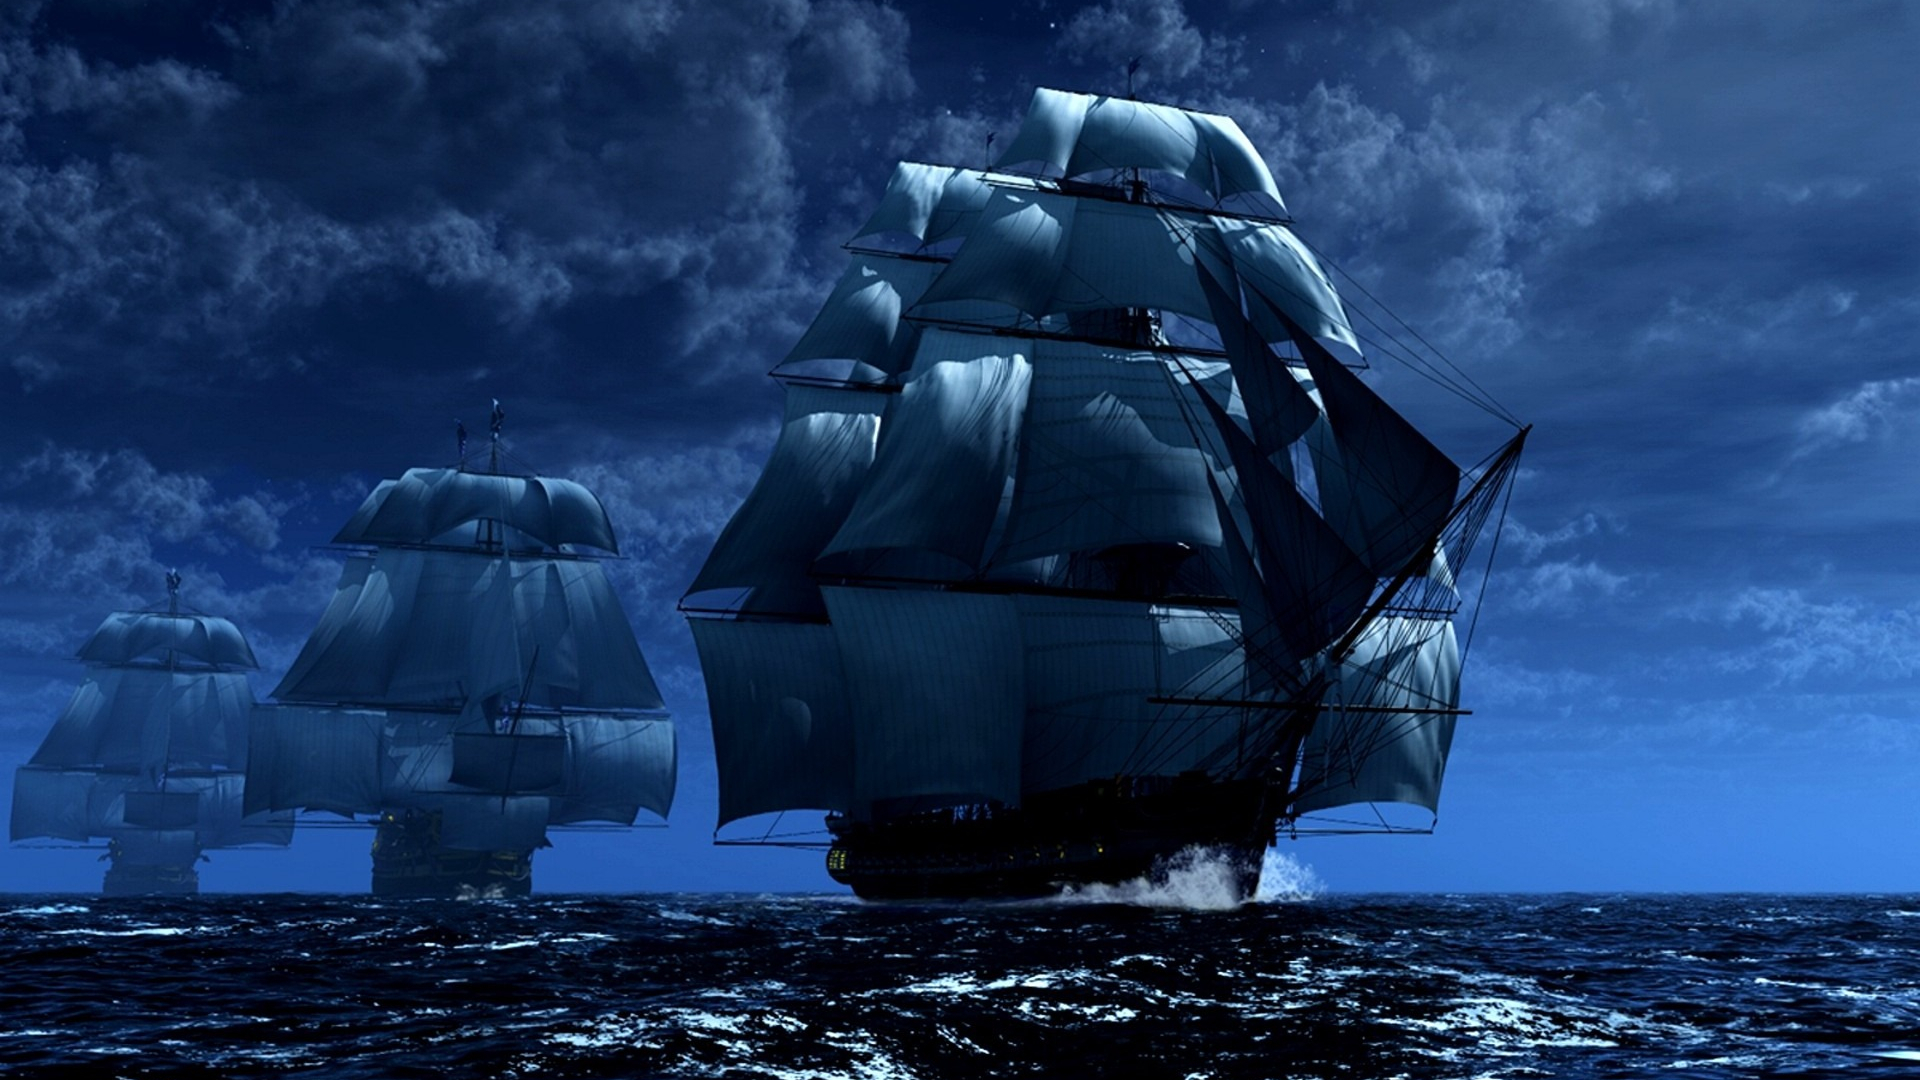 1920x1080 Free download The sailing ships wallpapers and images wallpapers pictures photos [1920x1200] for your Desktop, Mobile \u0026 Tablet | Explore 38+ HD Sailing Wallpaper | Sailing Ships Wallpaper, Sailing Photos Wallpaper, HD Sailboat Wallpaper